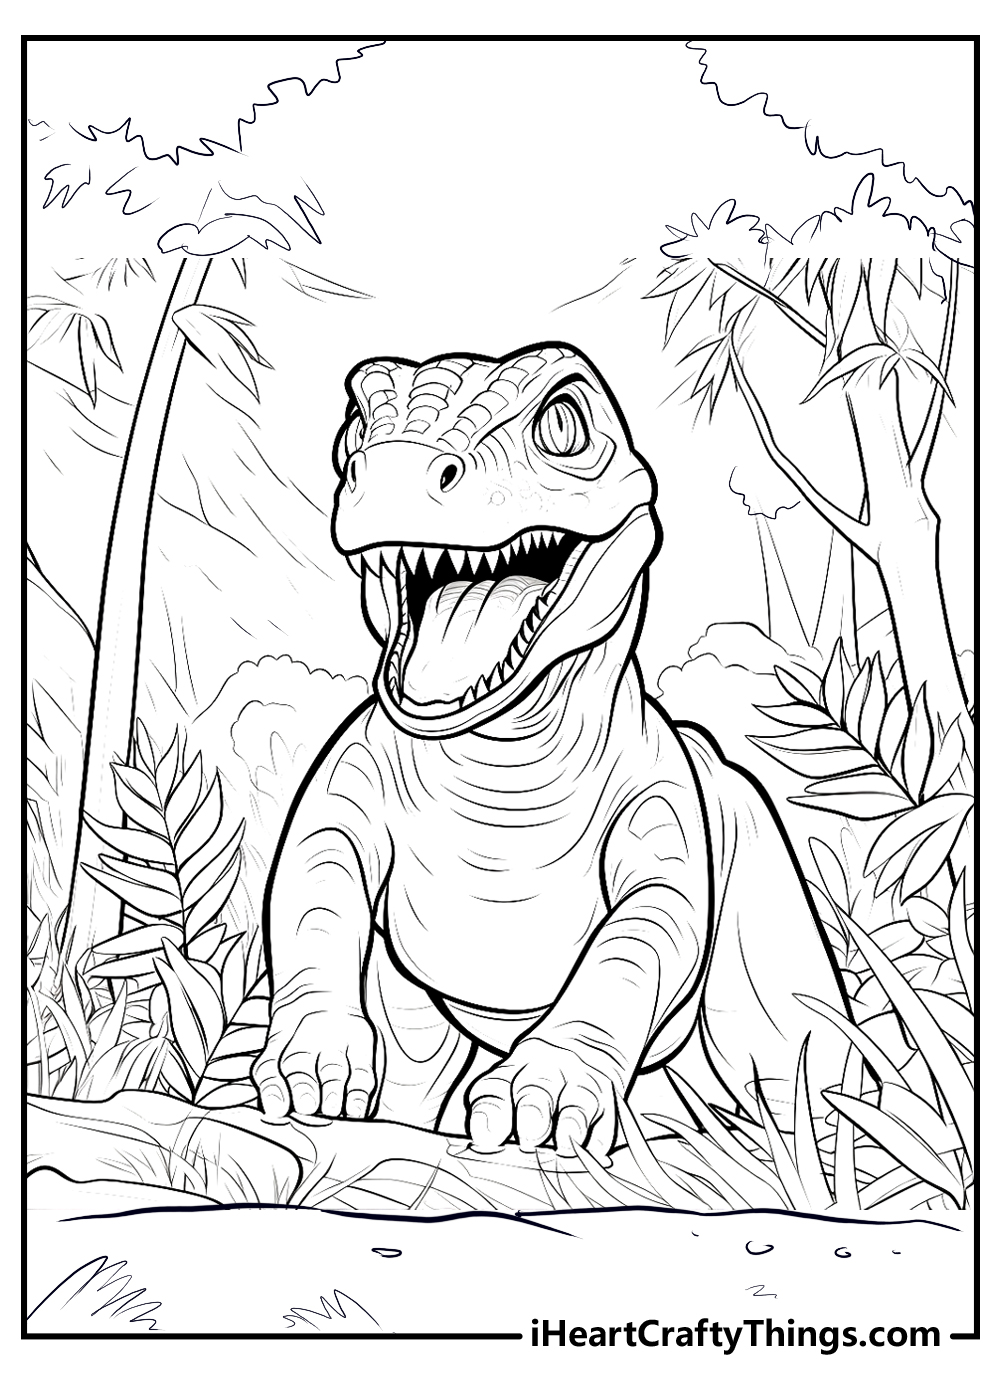 Jurassic park coloring pages